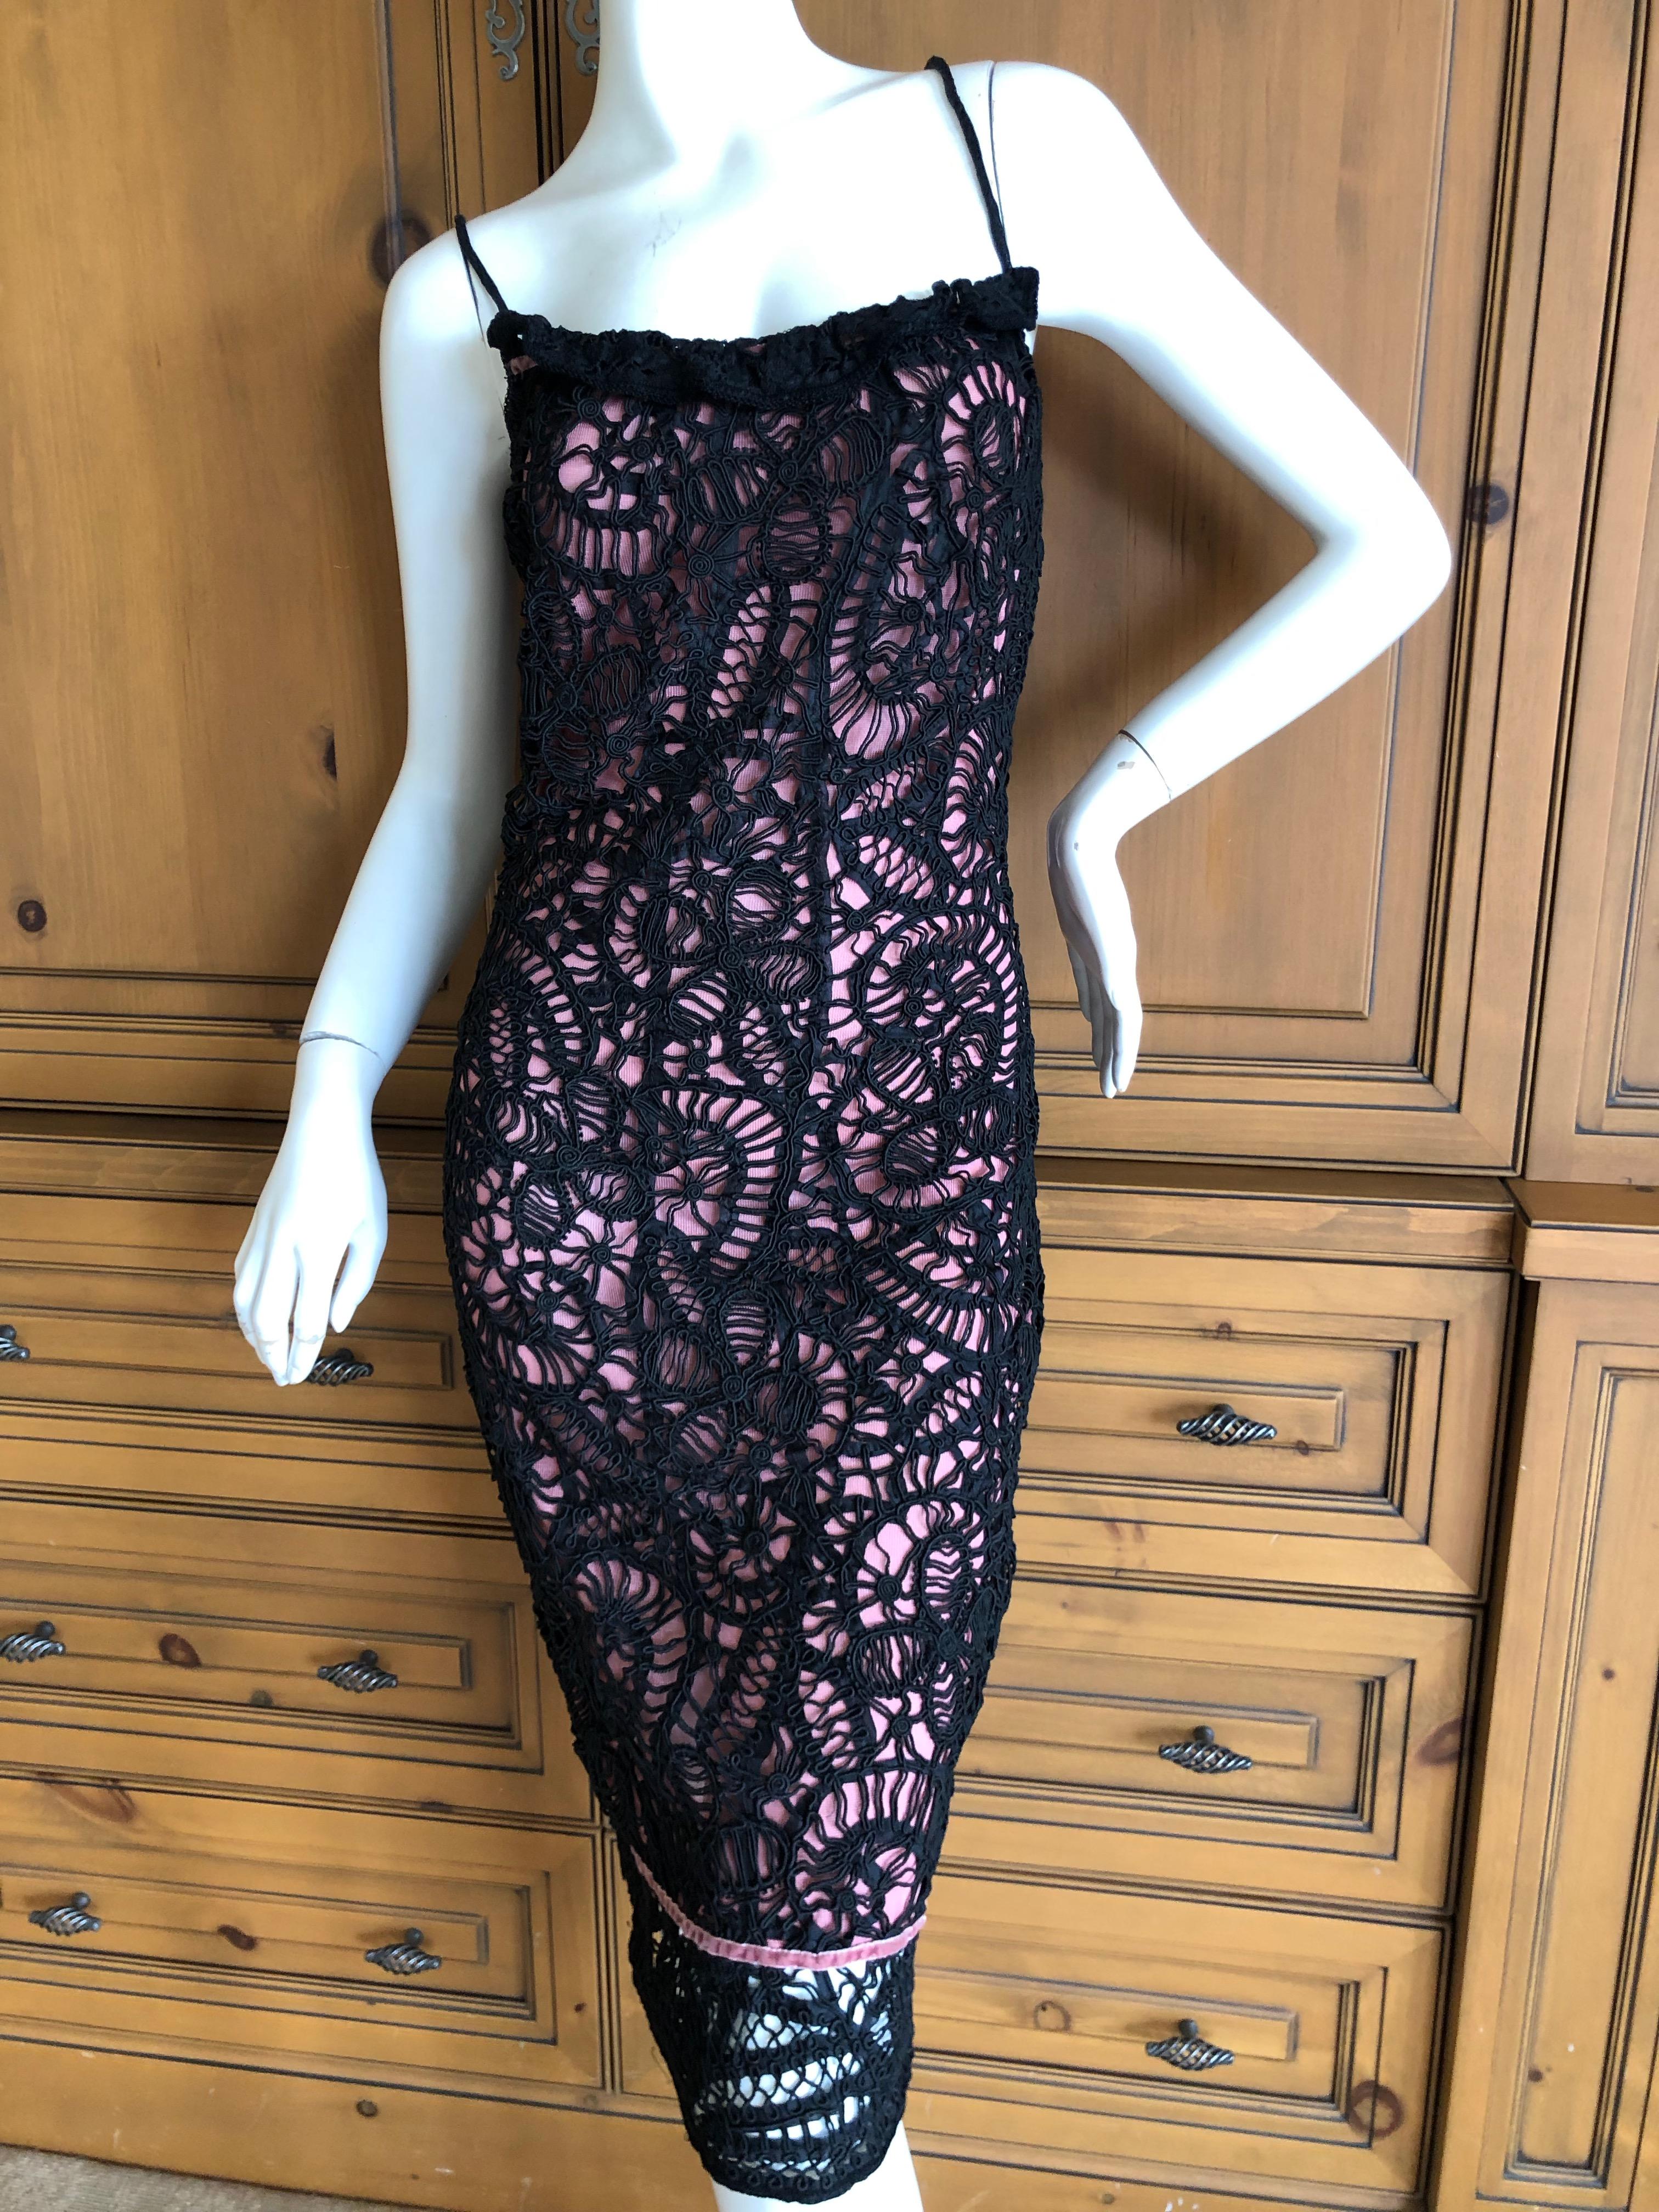 John Galliano Unusual 1990's Black Lace over Pale Pink Overlay Cocktail Dress For Sale 4